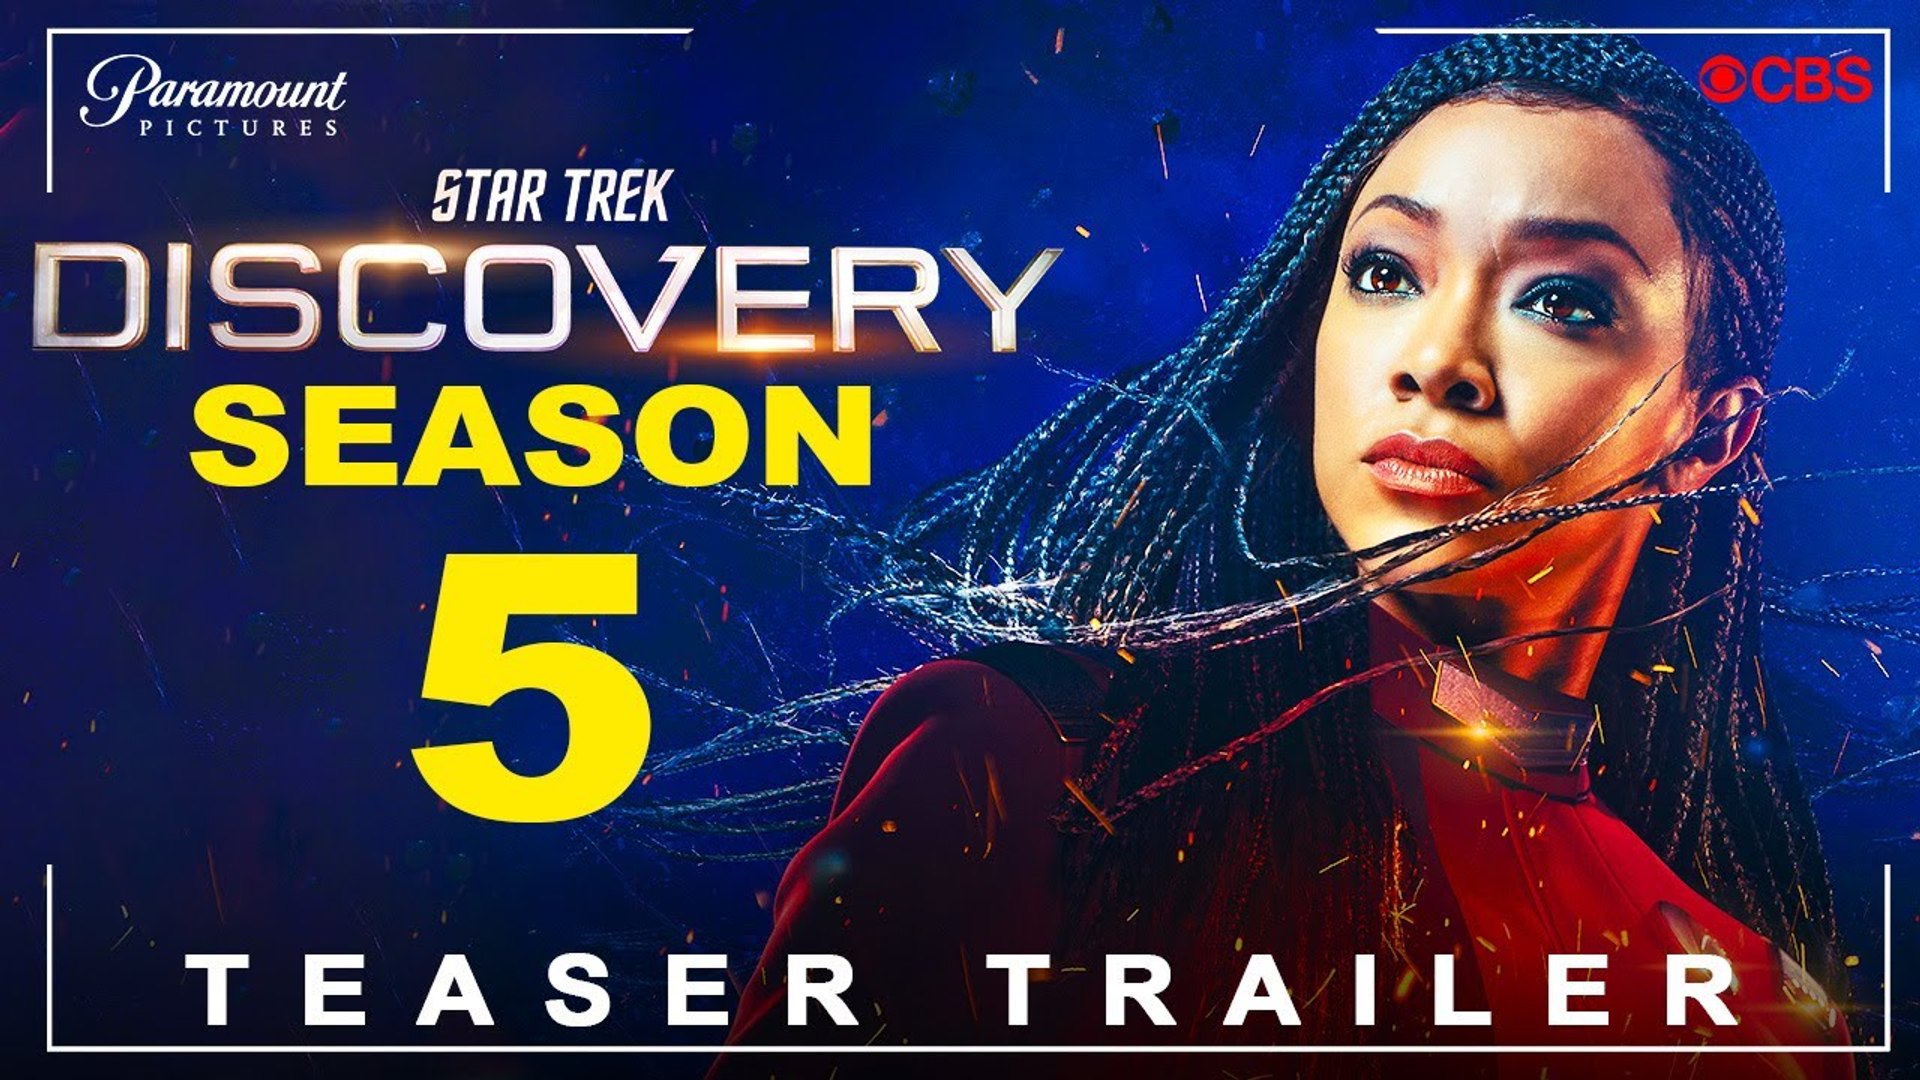 Star Trek: Discovery' to End With Season 5 at Paramount+